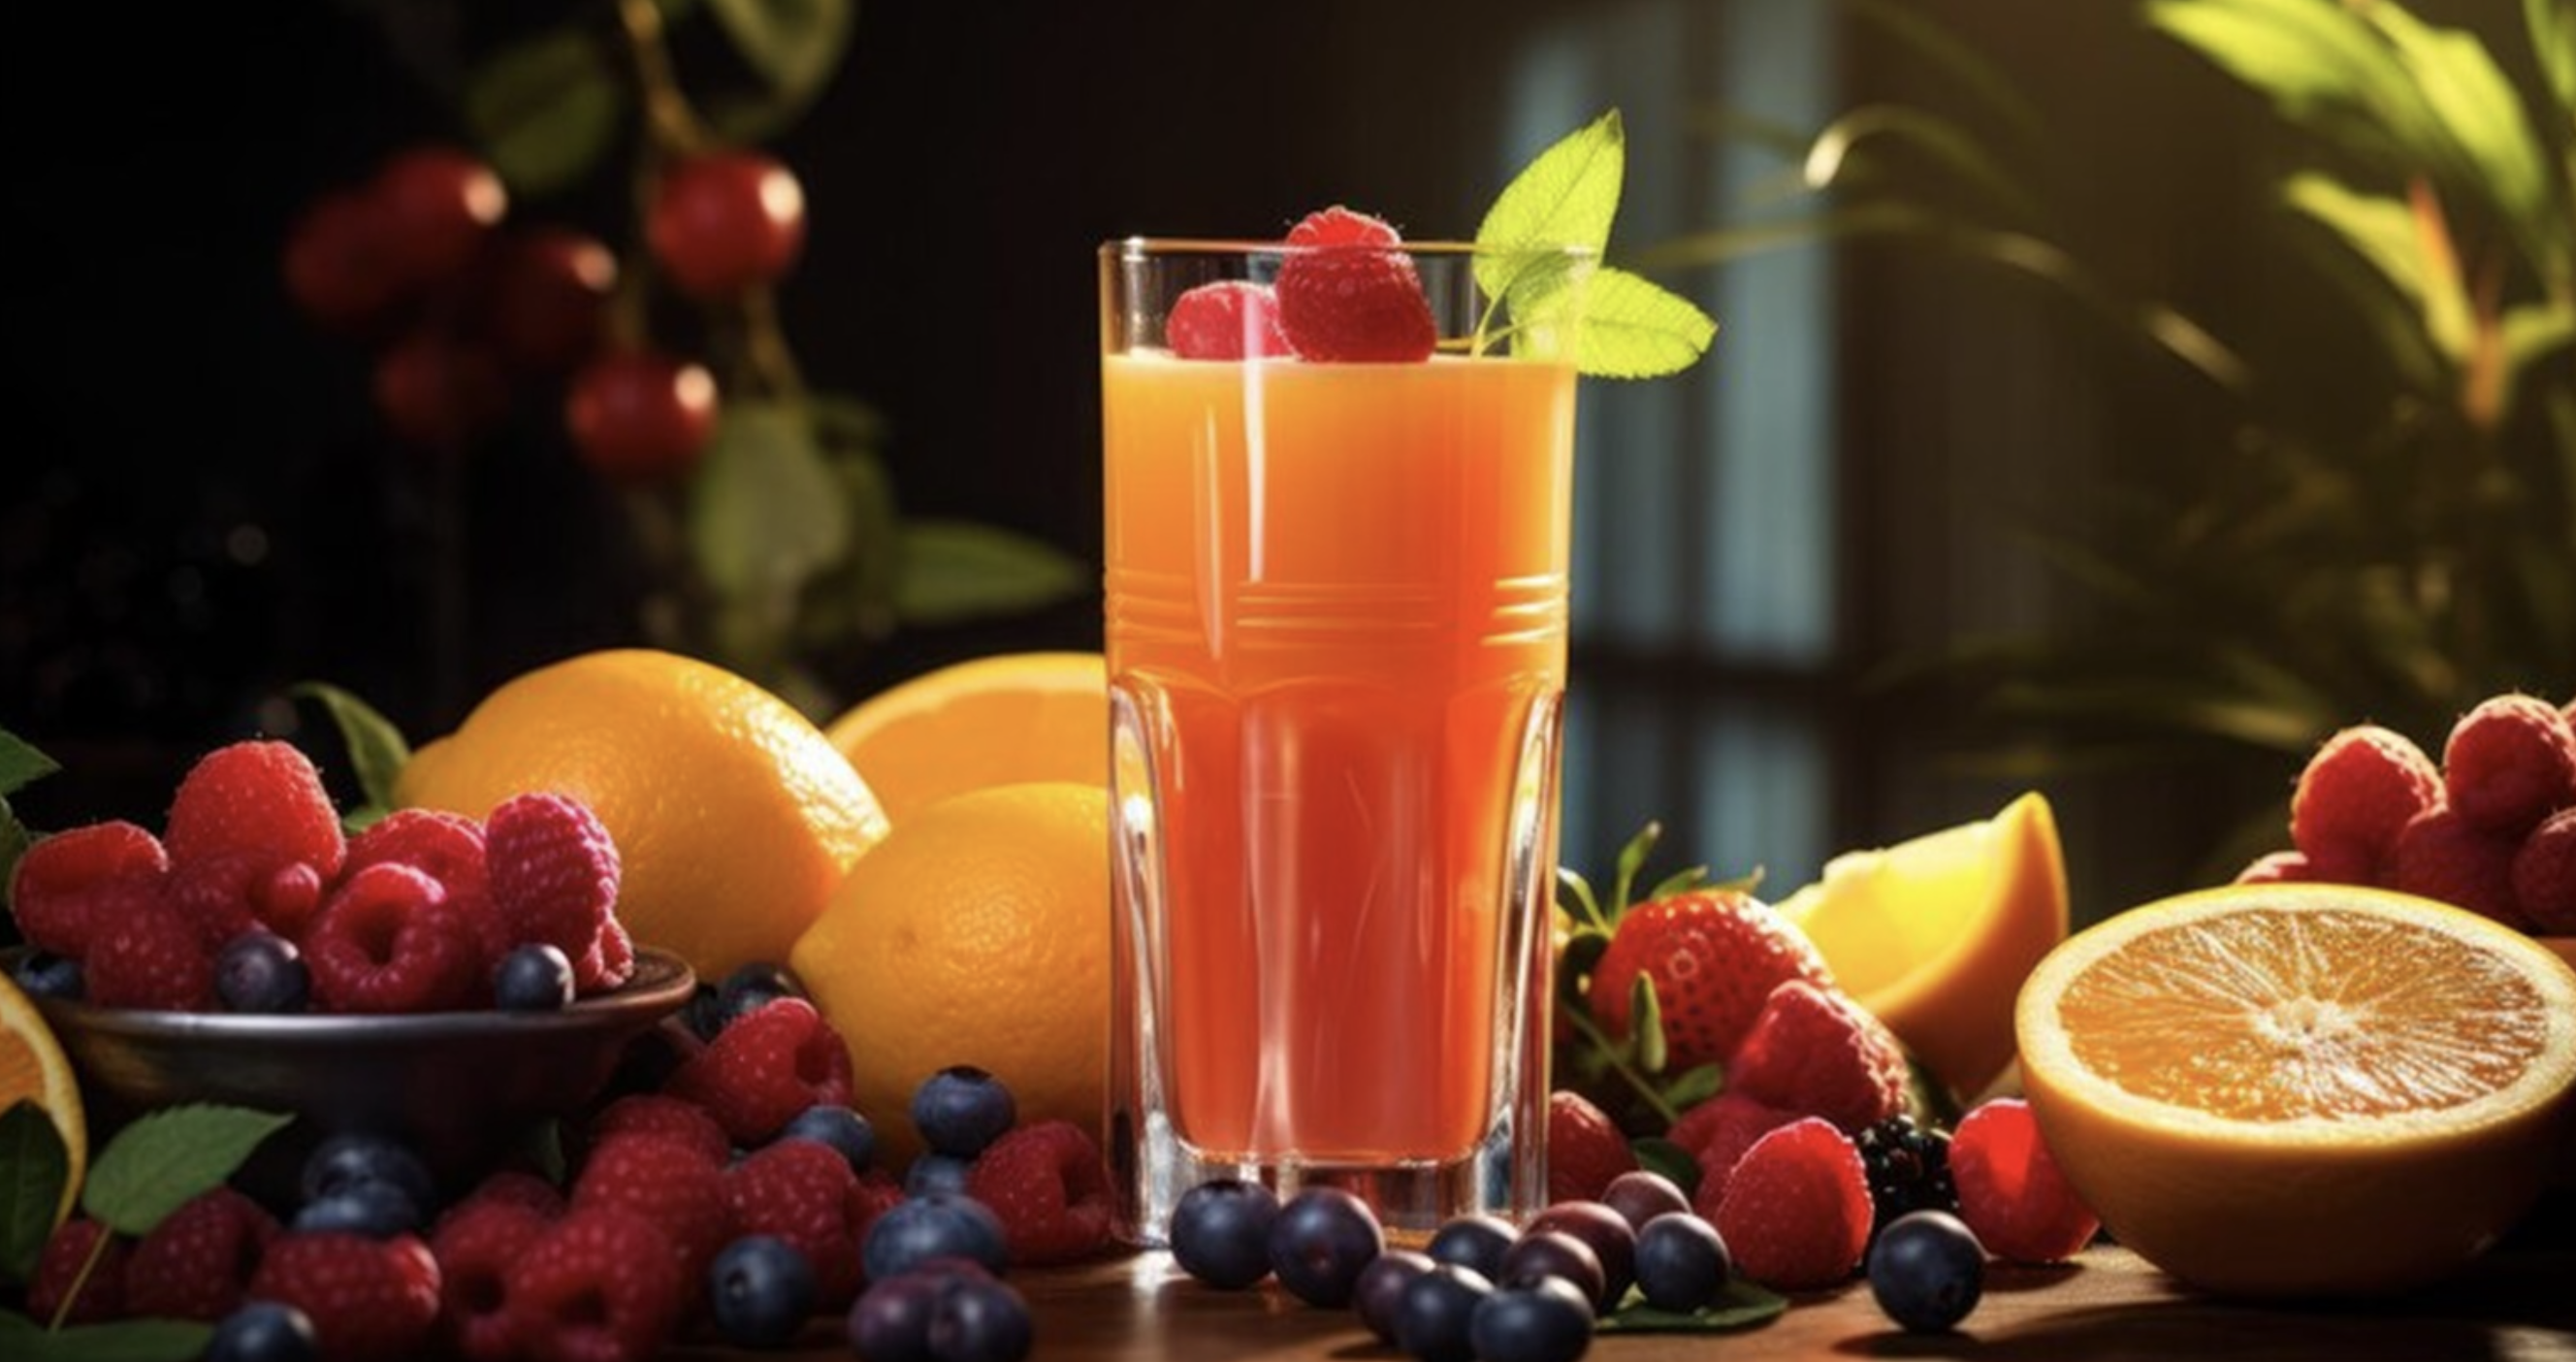 100% Pure Fruit Juice Claims Banned For Packaged Beverages